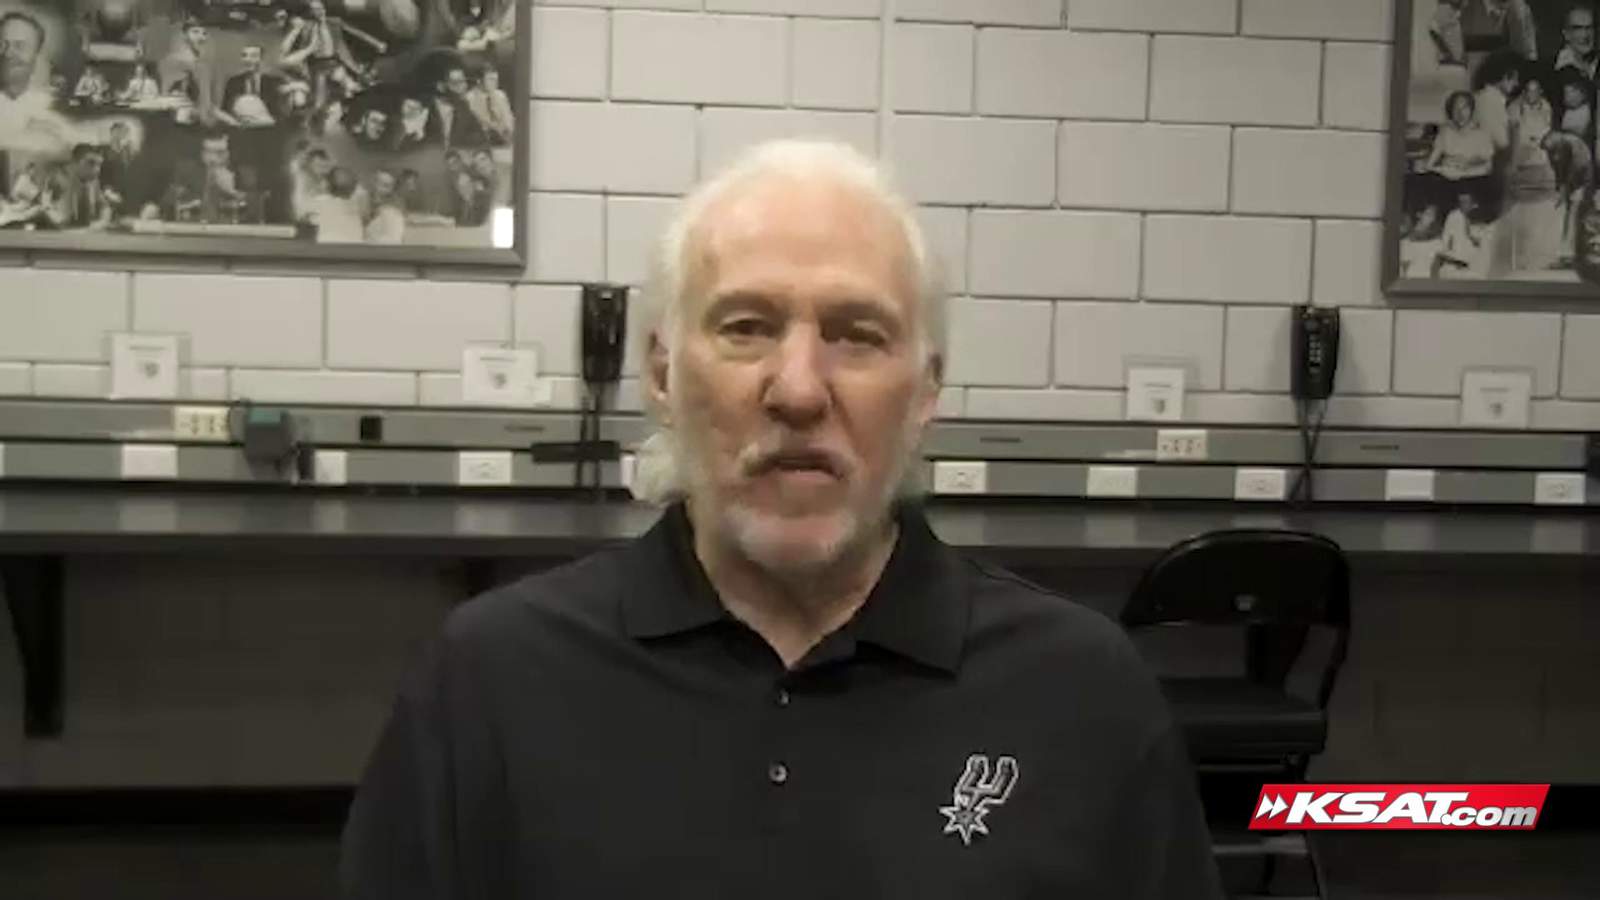 Popovich calls MLK ‘modern founding father,’ says King would be sad ‘white supremacists’ stormed Capitol